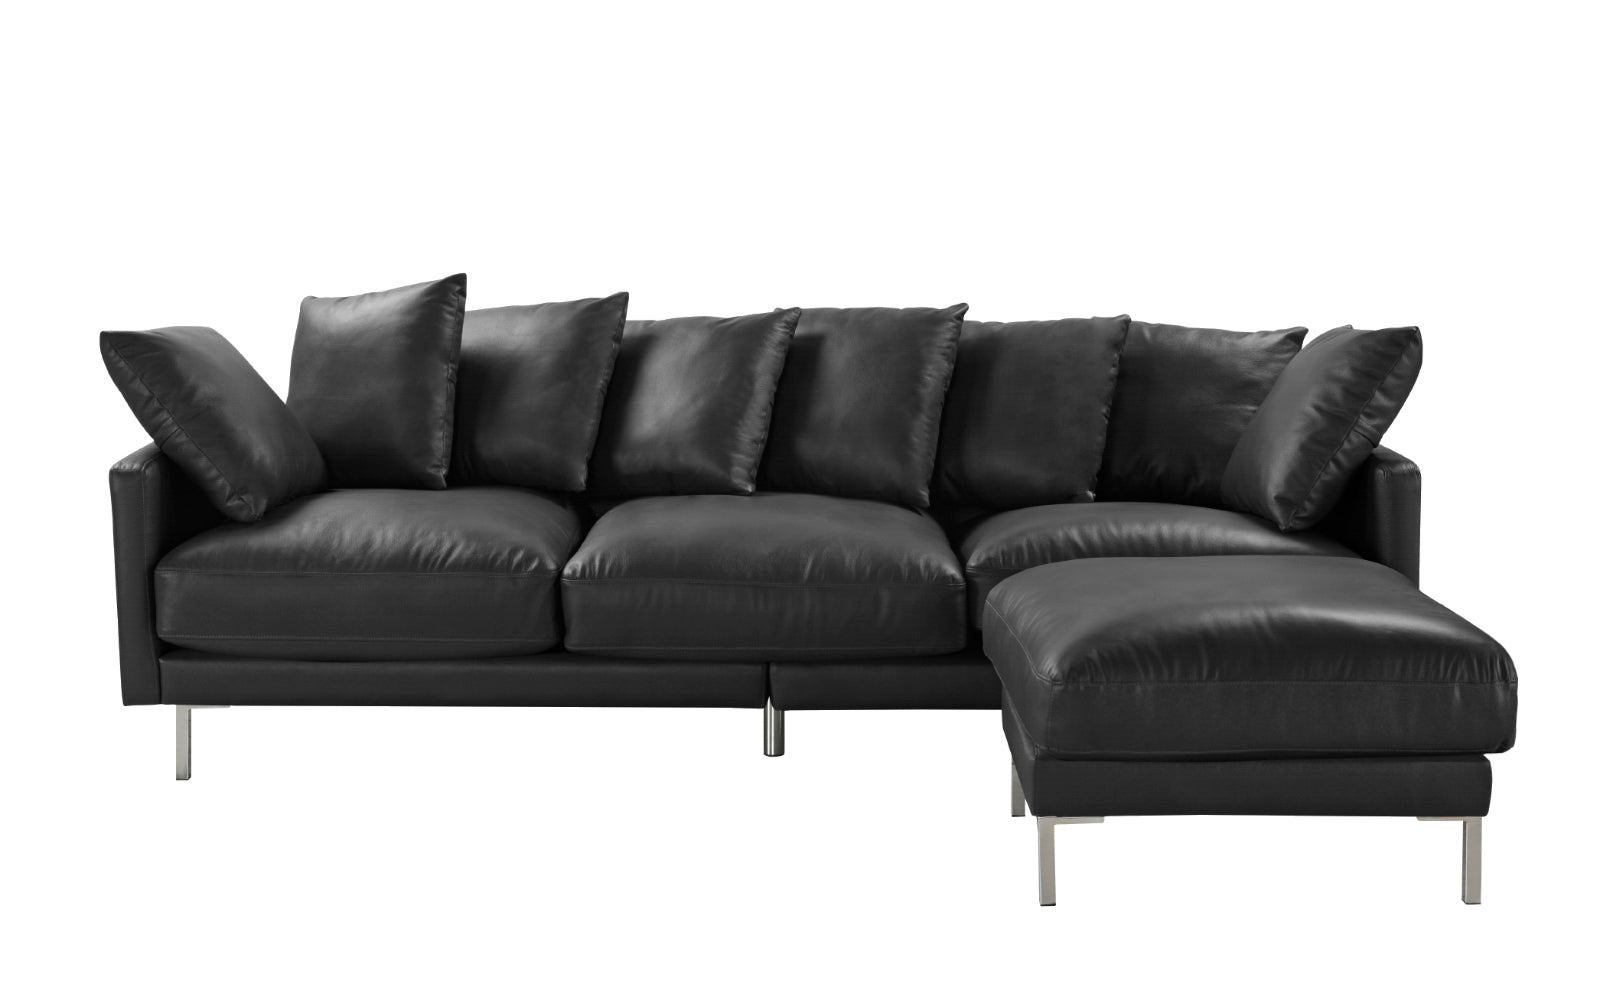 Albany Modern Leather Match Sectional Sofa With Steel Legs